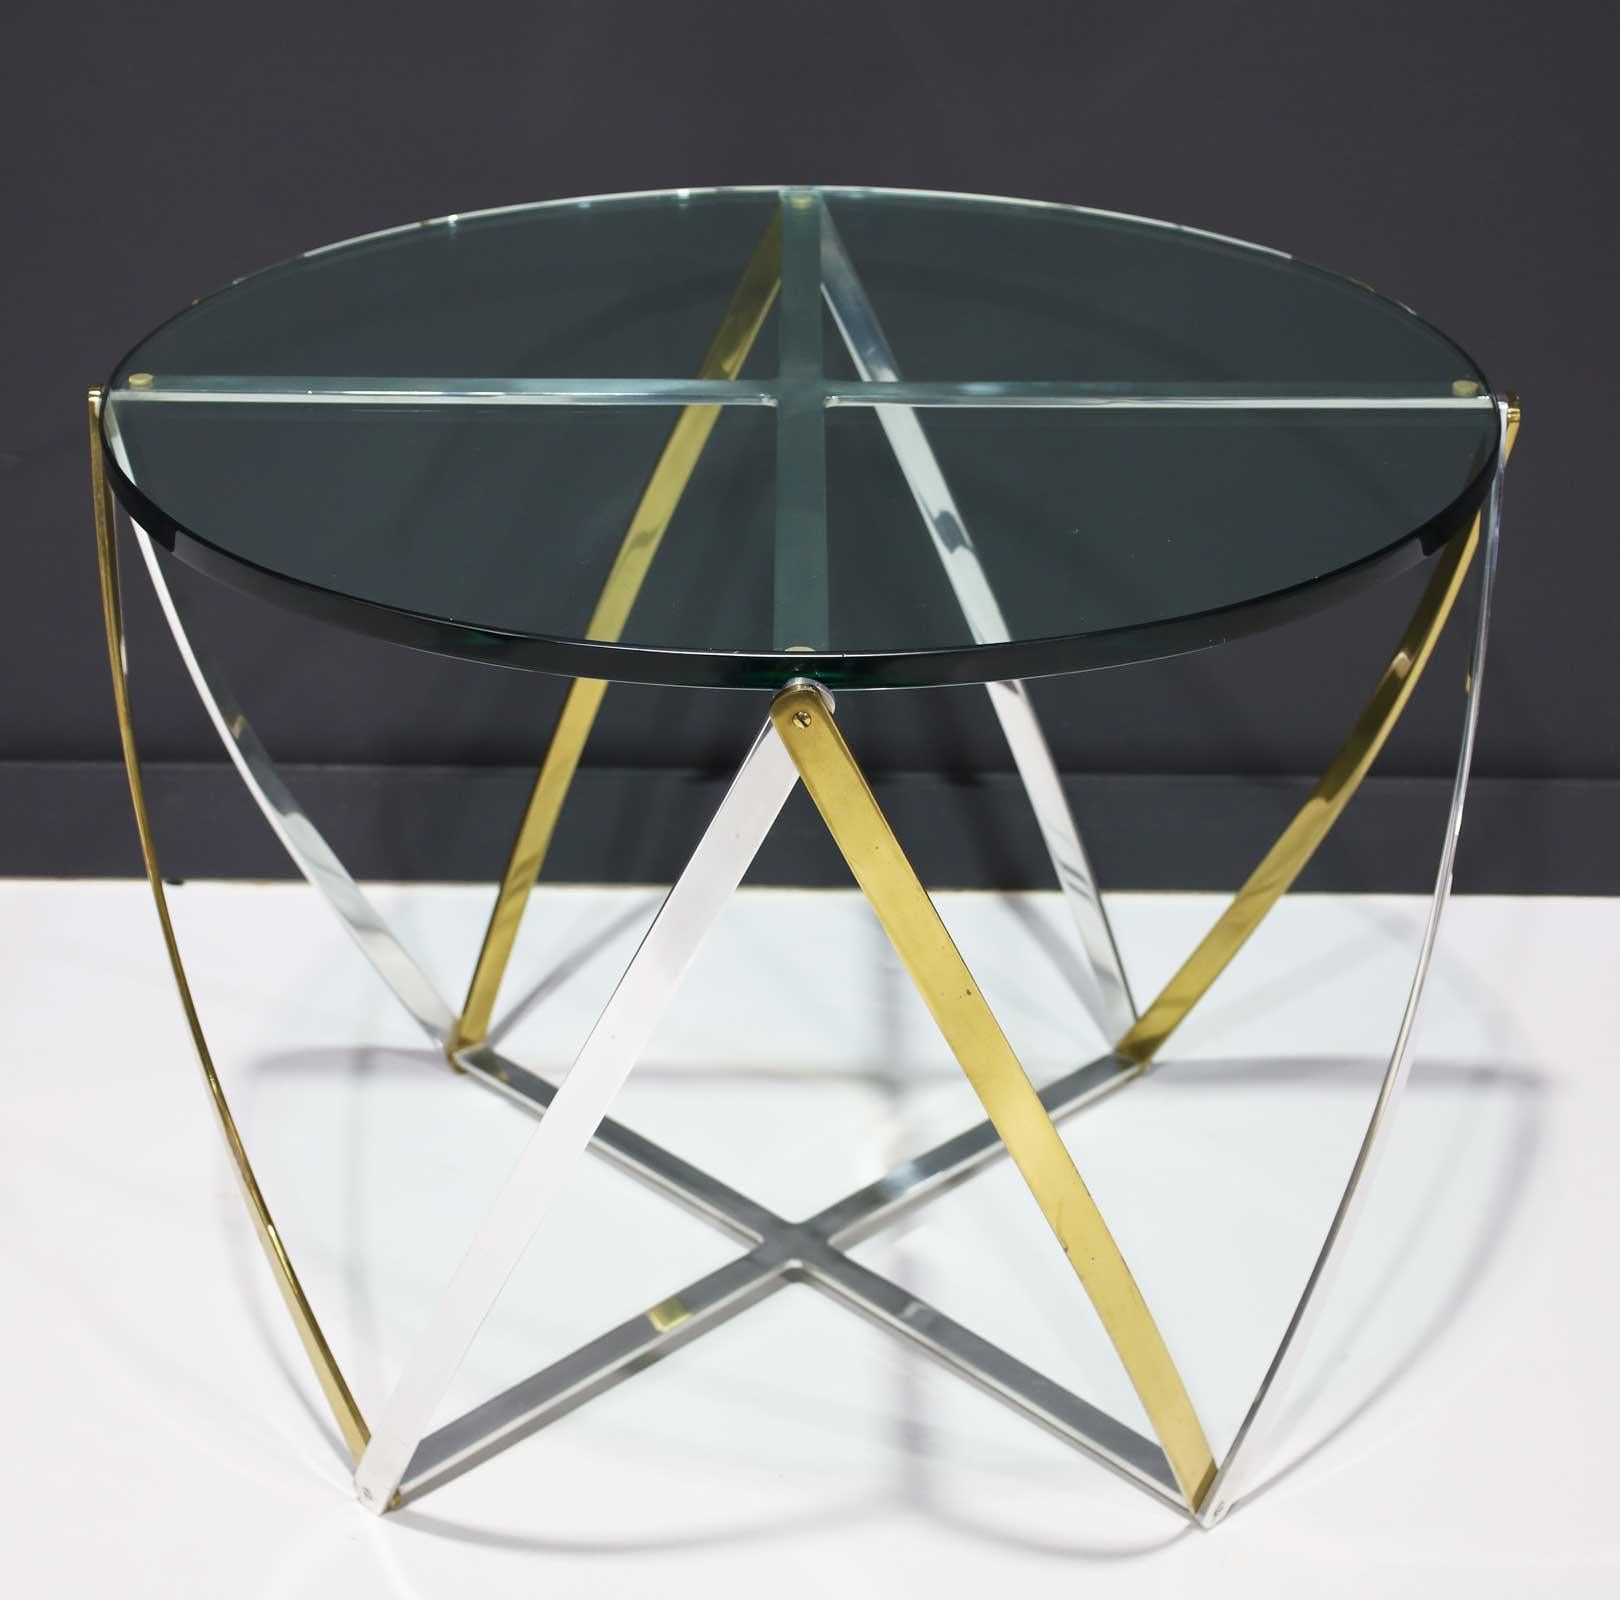 Beautiful table by John Vesey, known for highest quality design. Mixed metals add interest to the table. Table has a 3/4